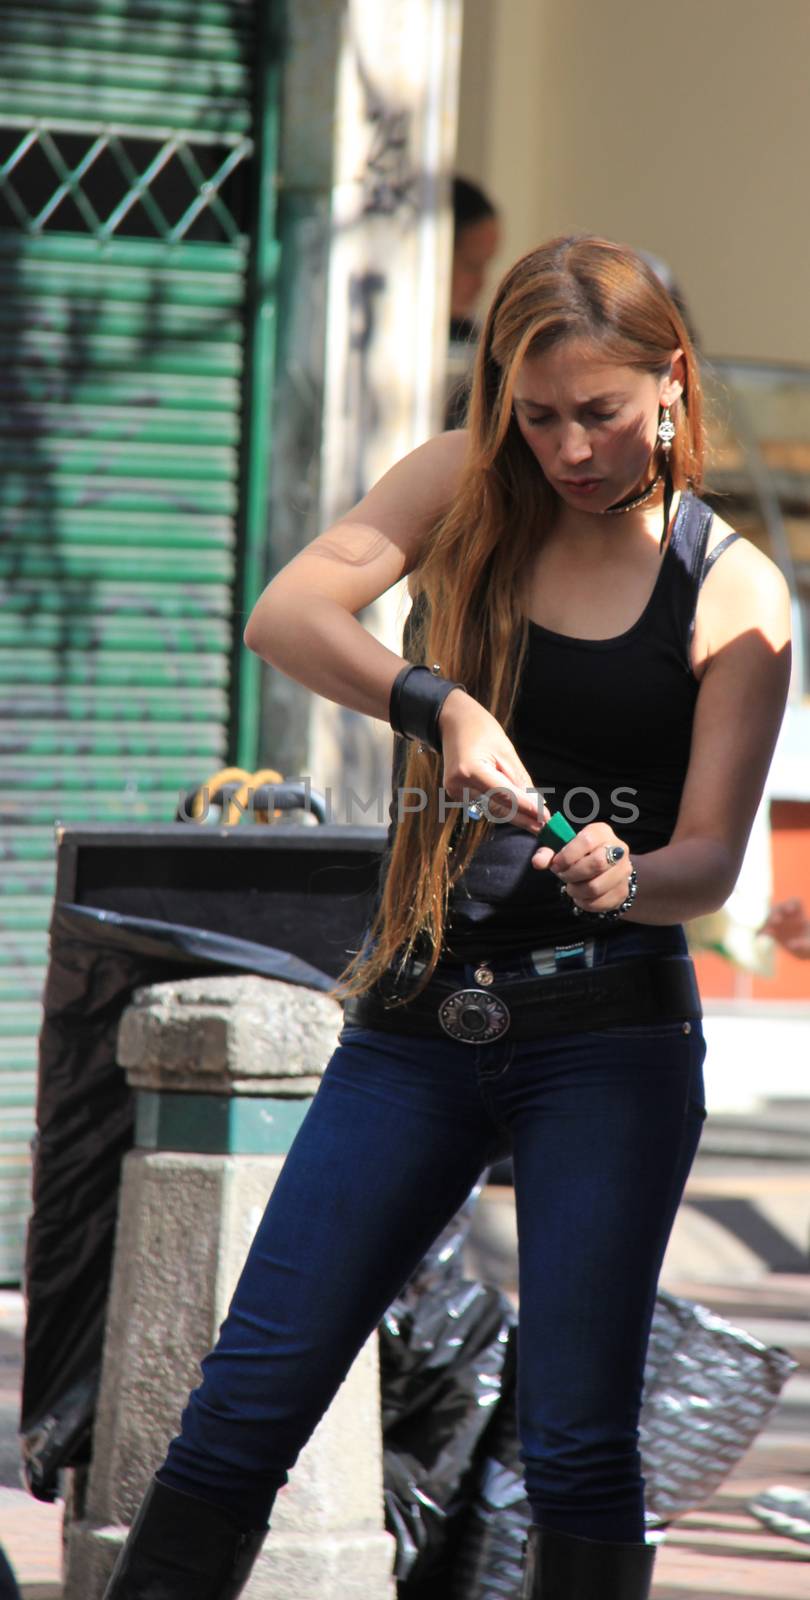 A young lady at a market in Bogota, Columbia
03 May 2014
No model release
Editorial only